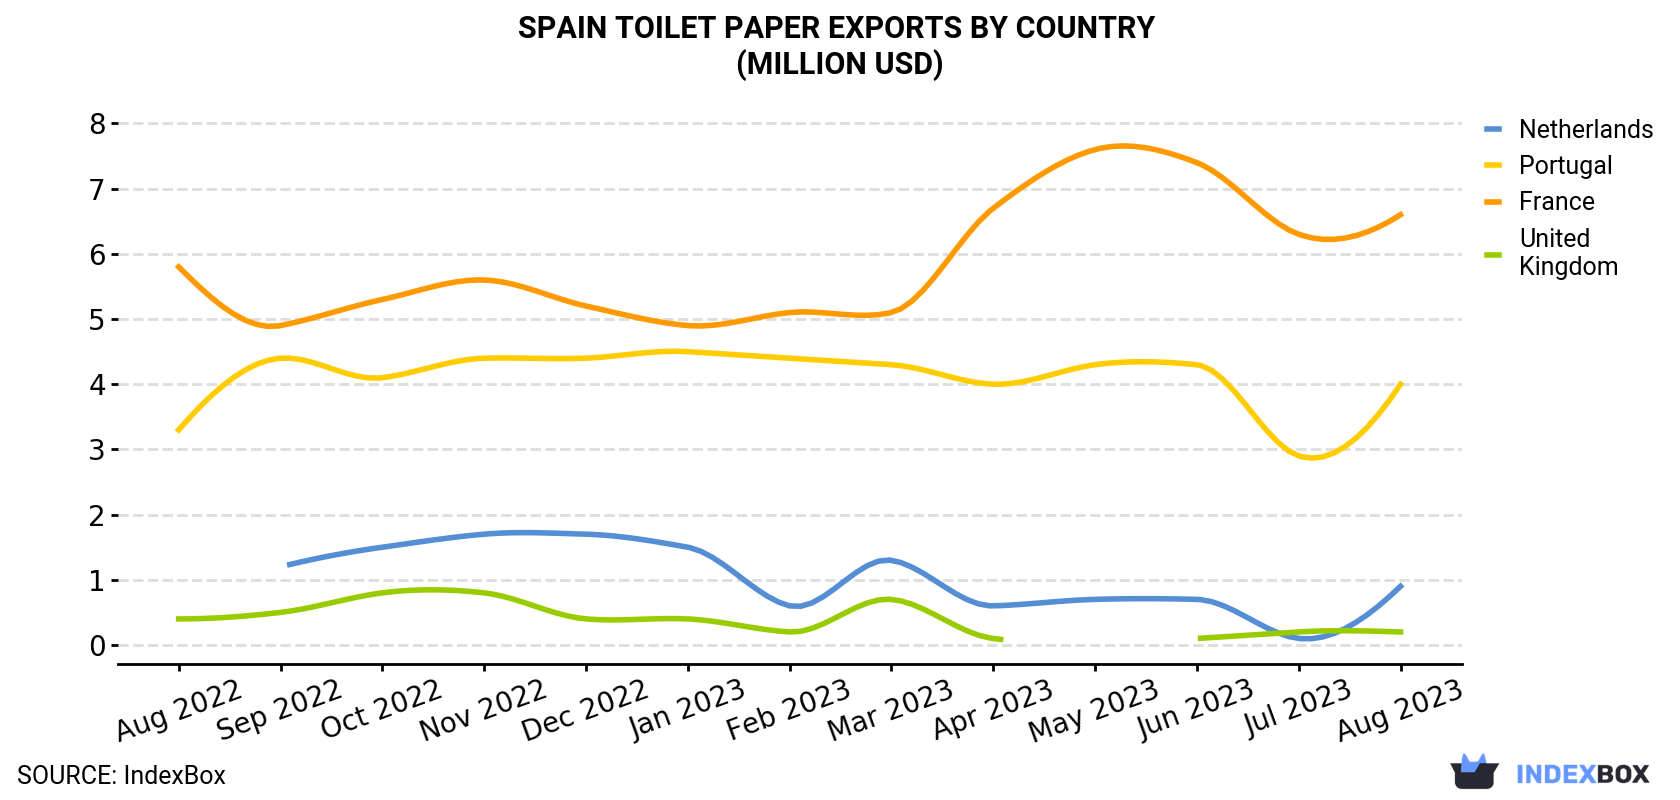 Spain Toilet Paper Exports By Country (Million USD)